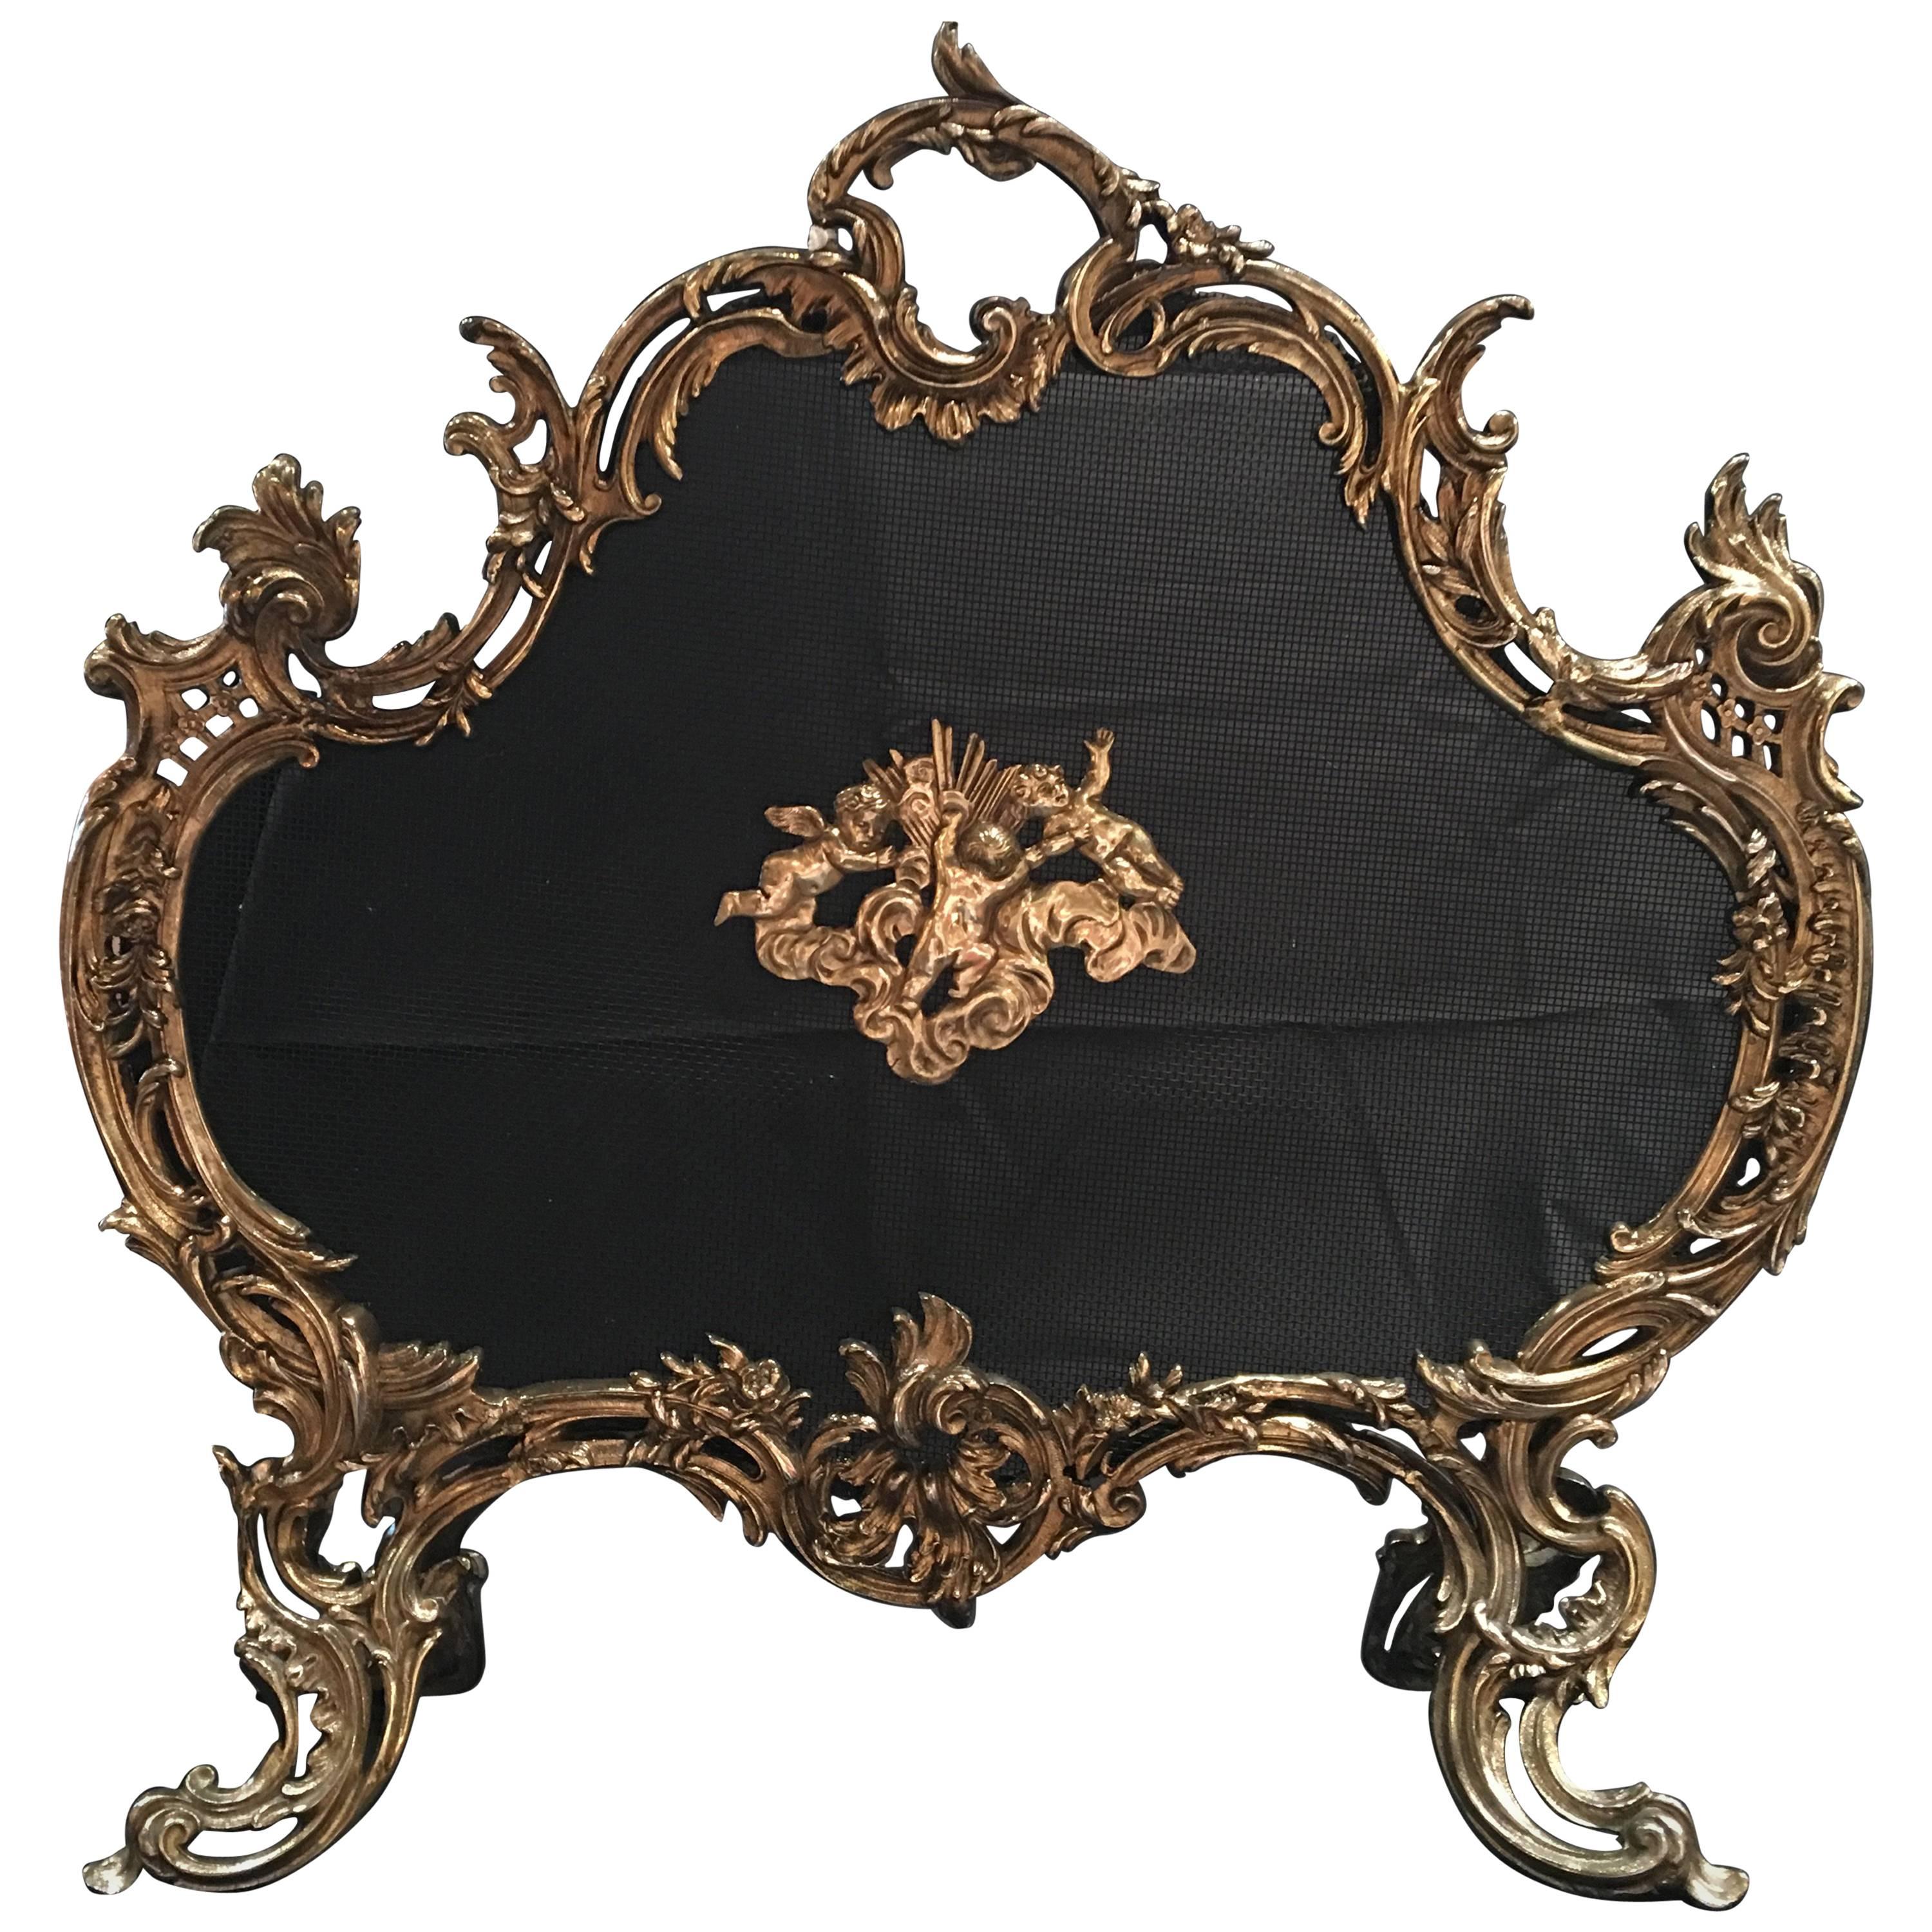 French Polished Brass Fireplace Screen with Decorative Cherubs, 19th Century